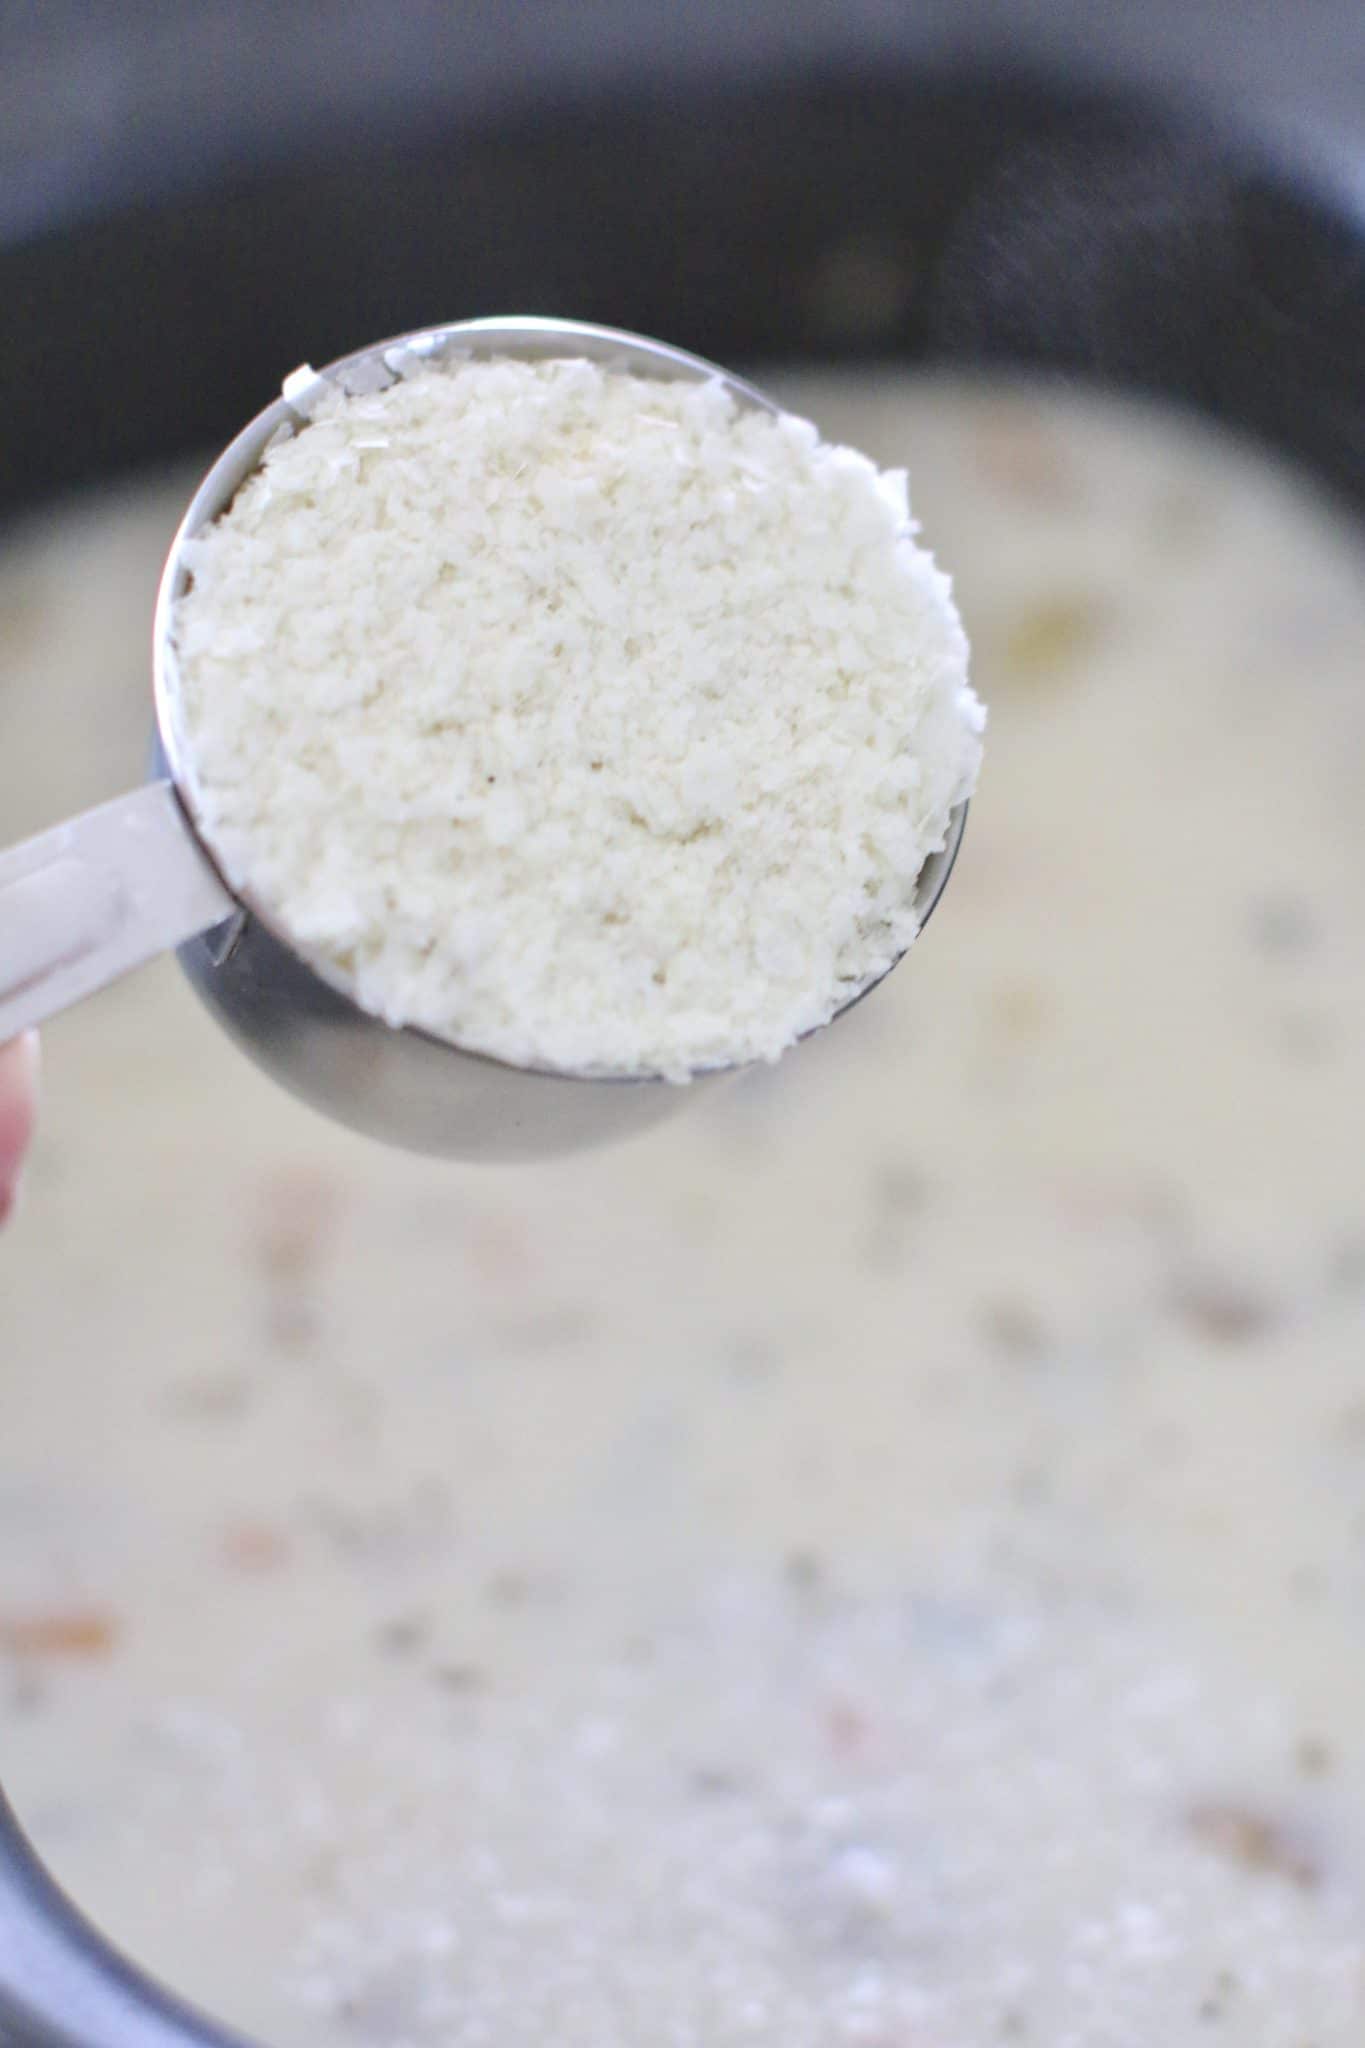 instant mashed potato flakes being poured into a crock pot chowder.